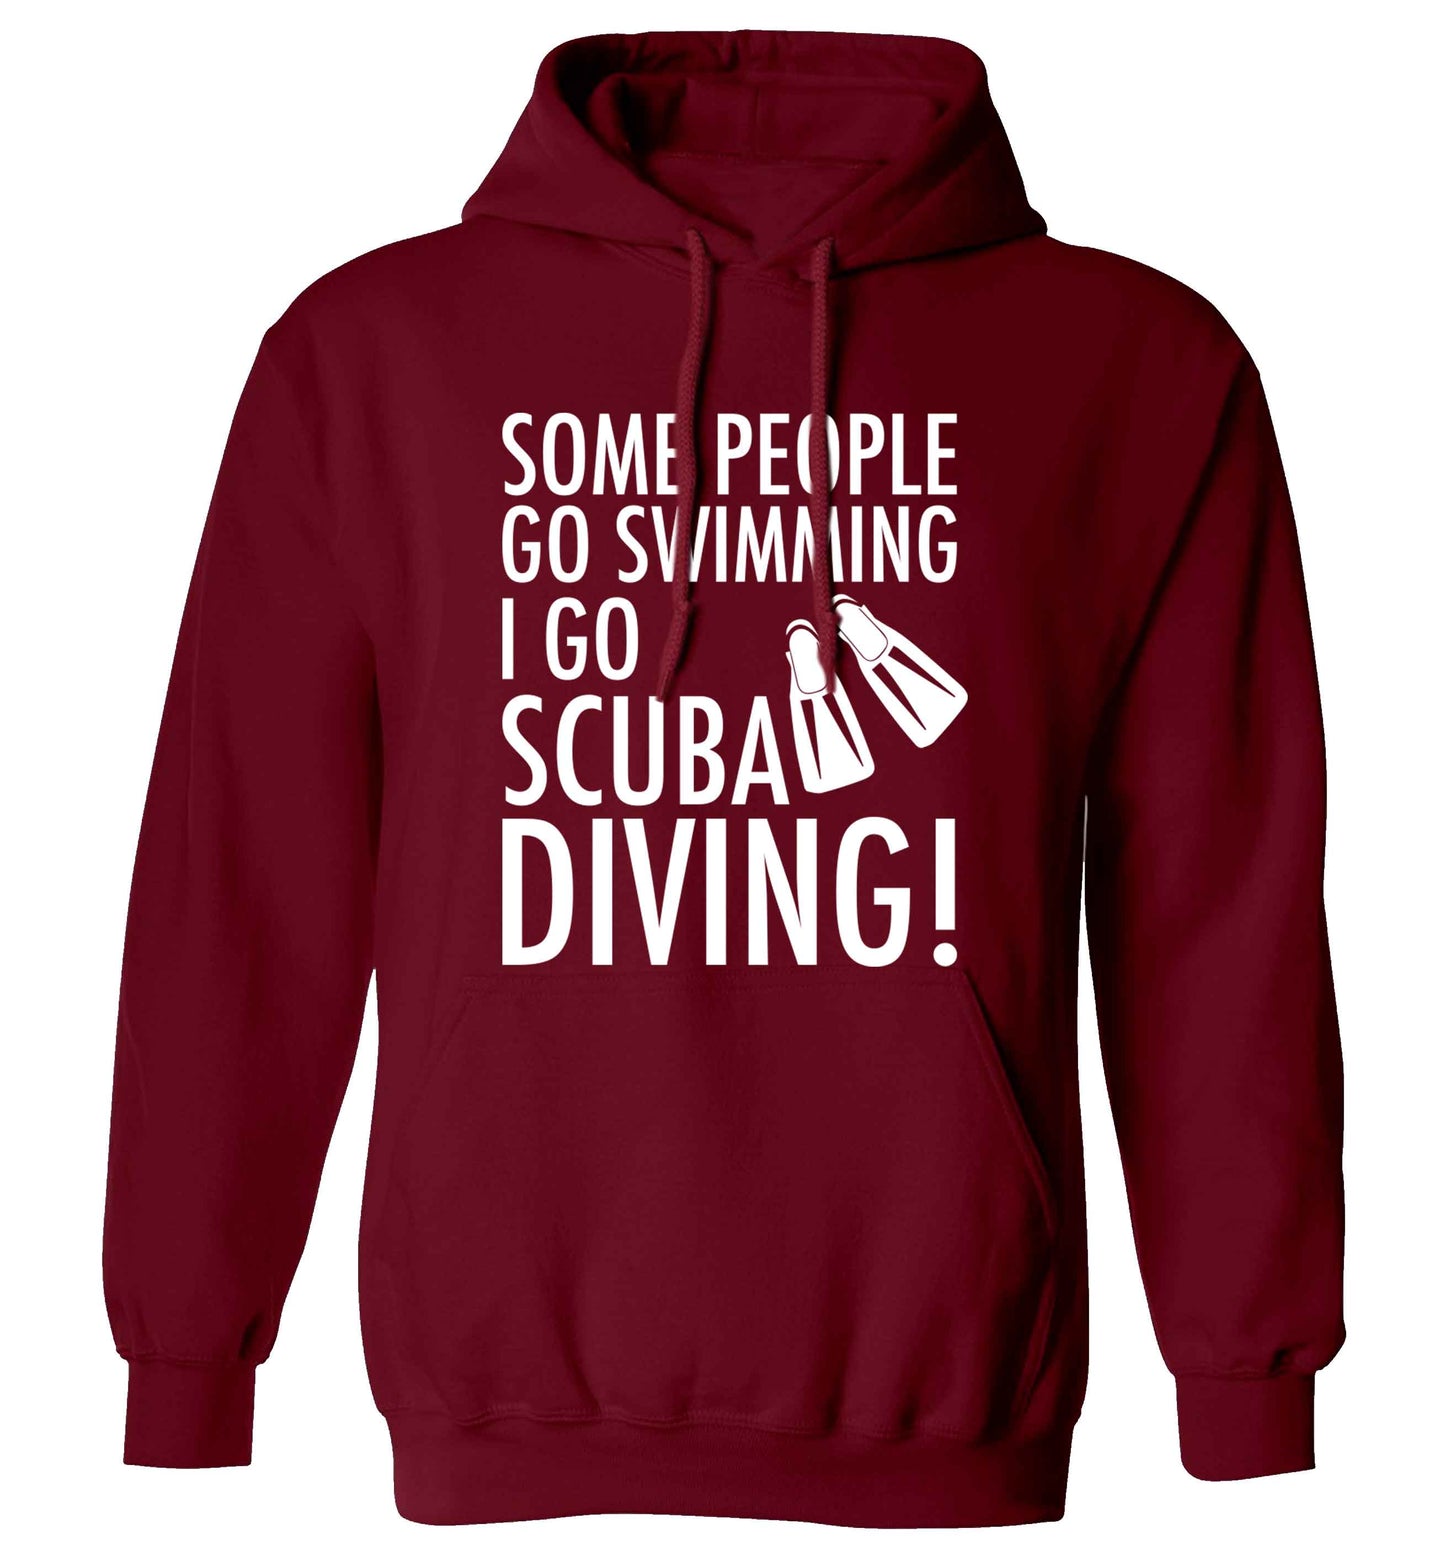 Some people go swimming I go scuba diving! adults unisex maroon hoodie 2XL